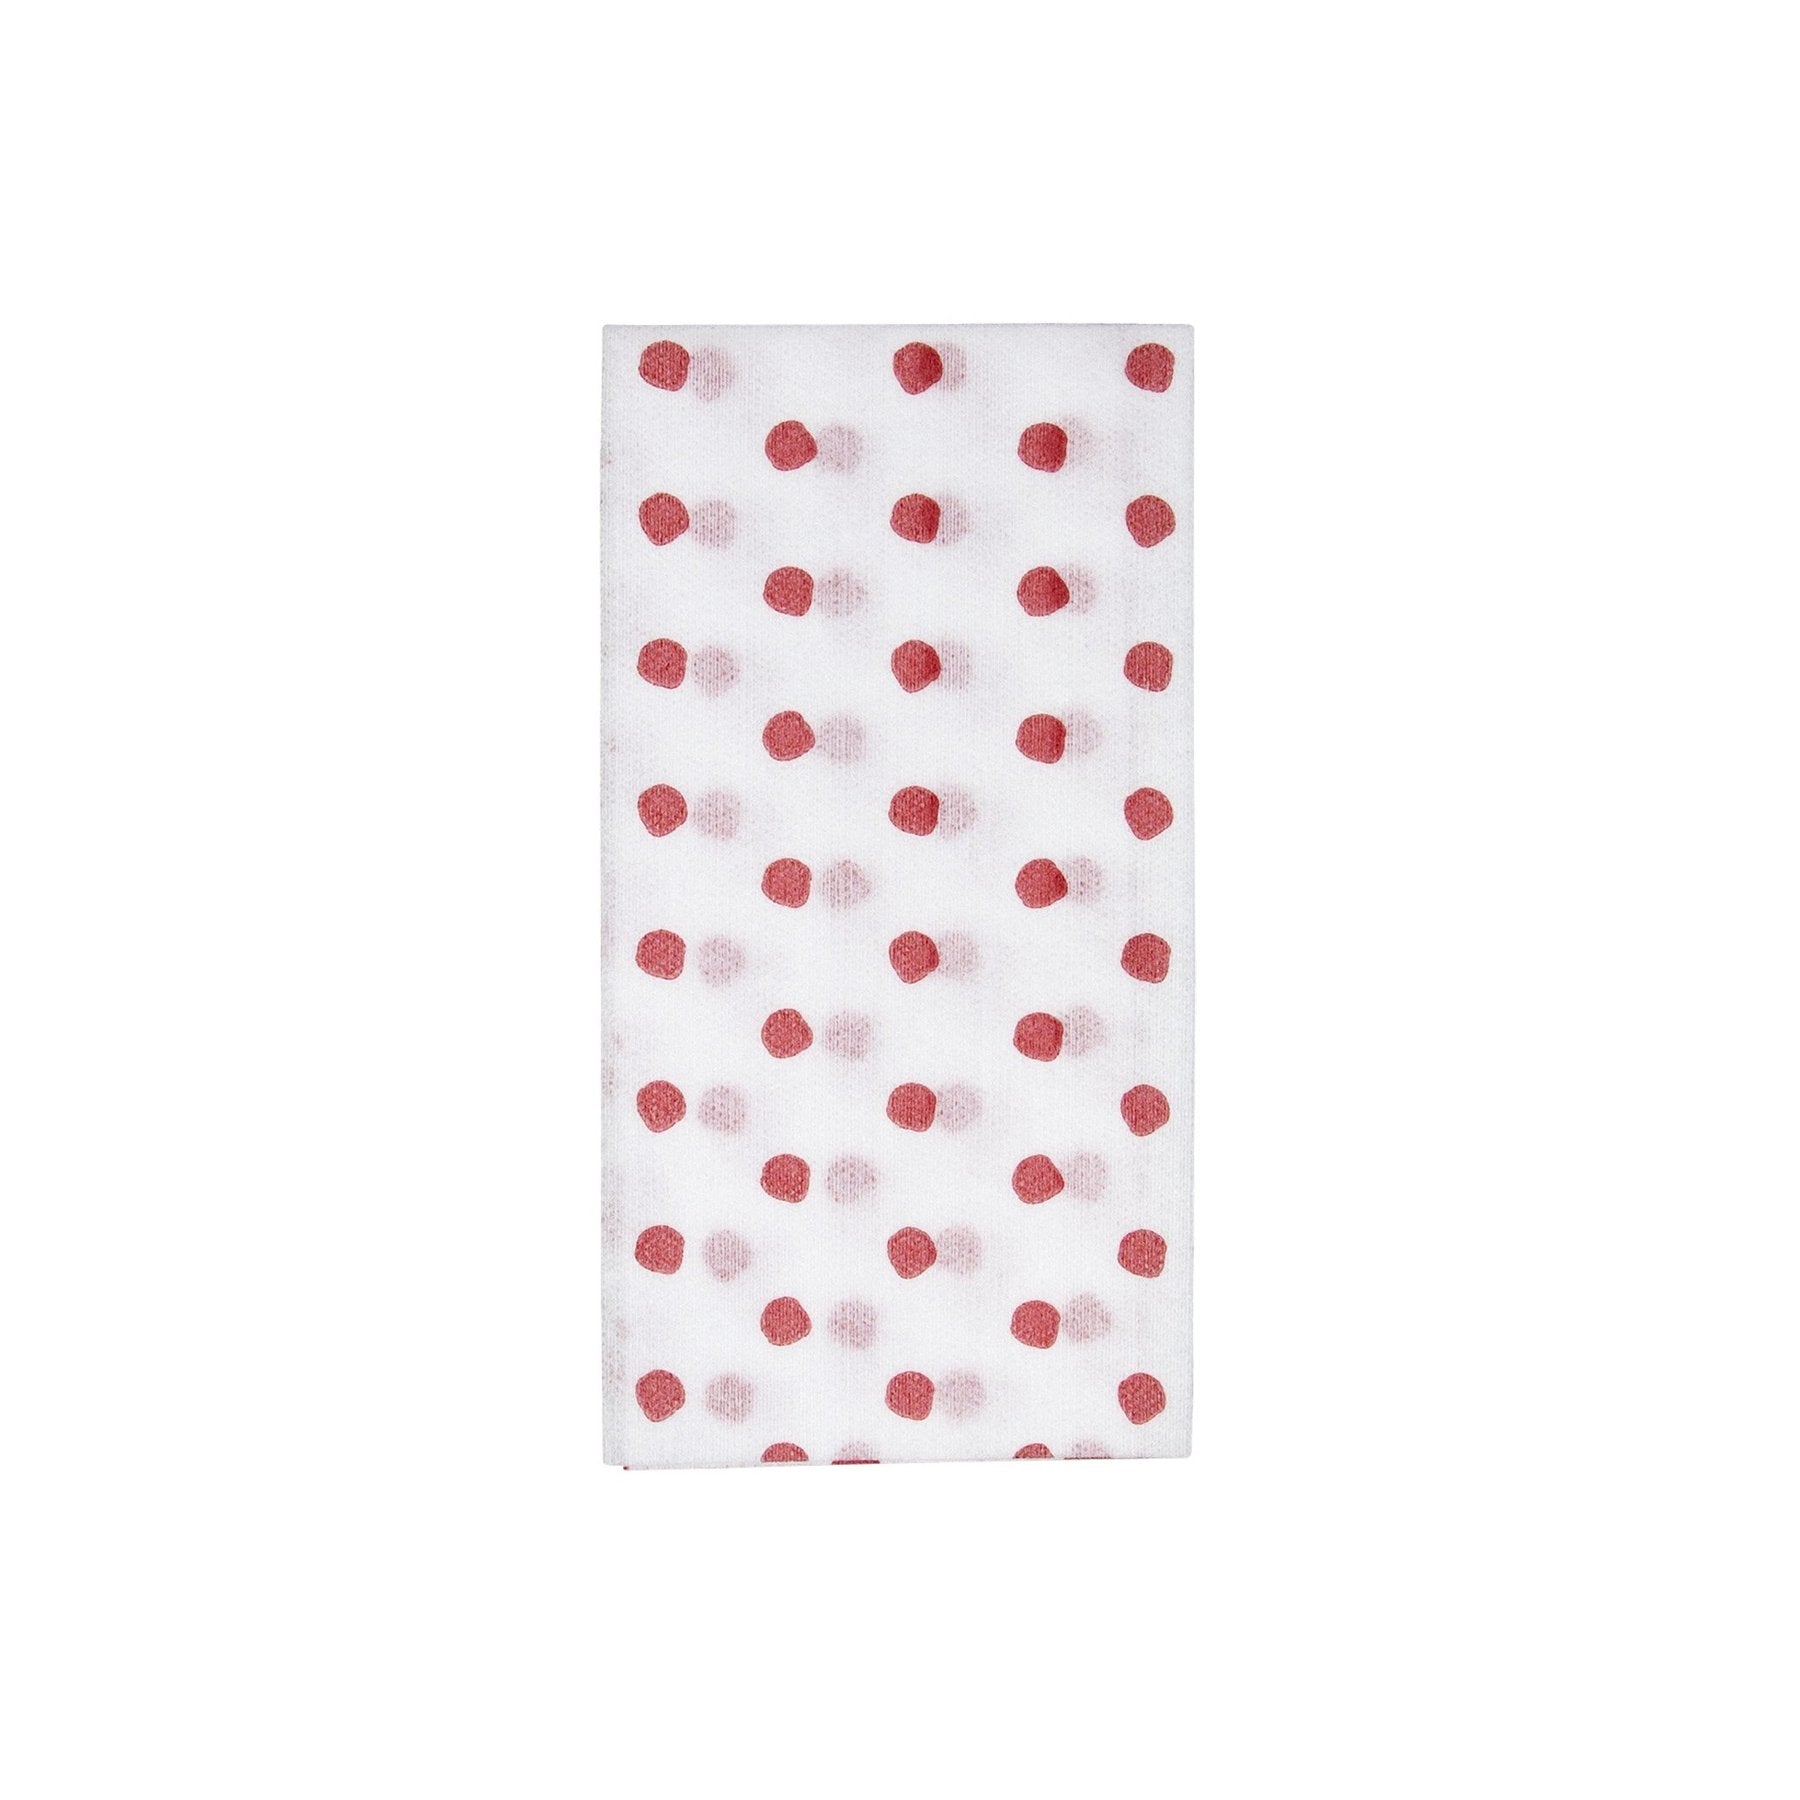 Papersoft Napkins Red Dot Guest Towels - Pack of 20